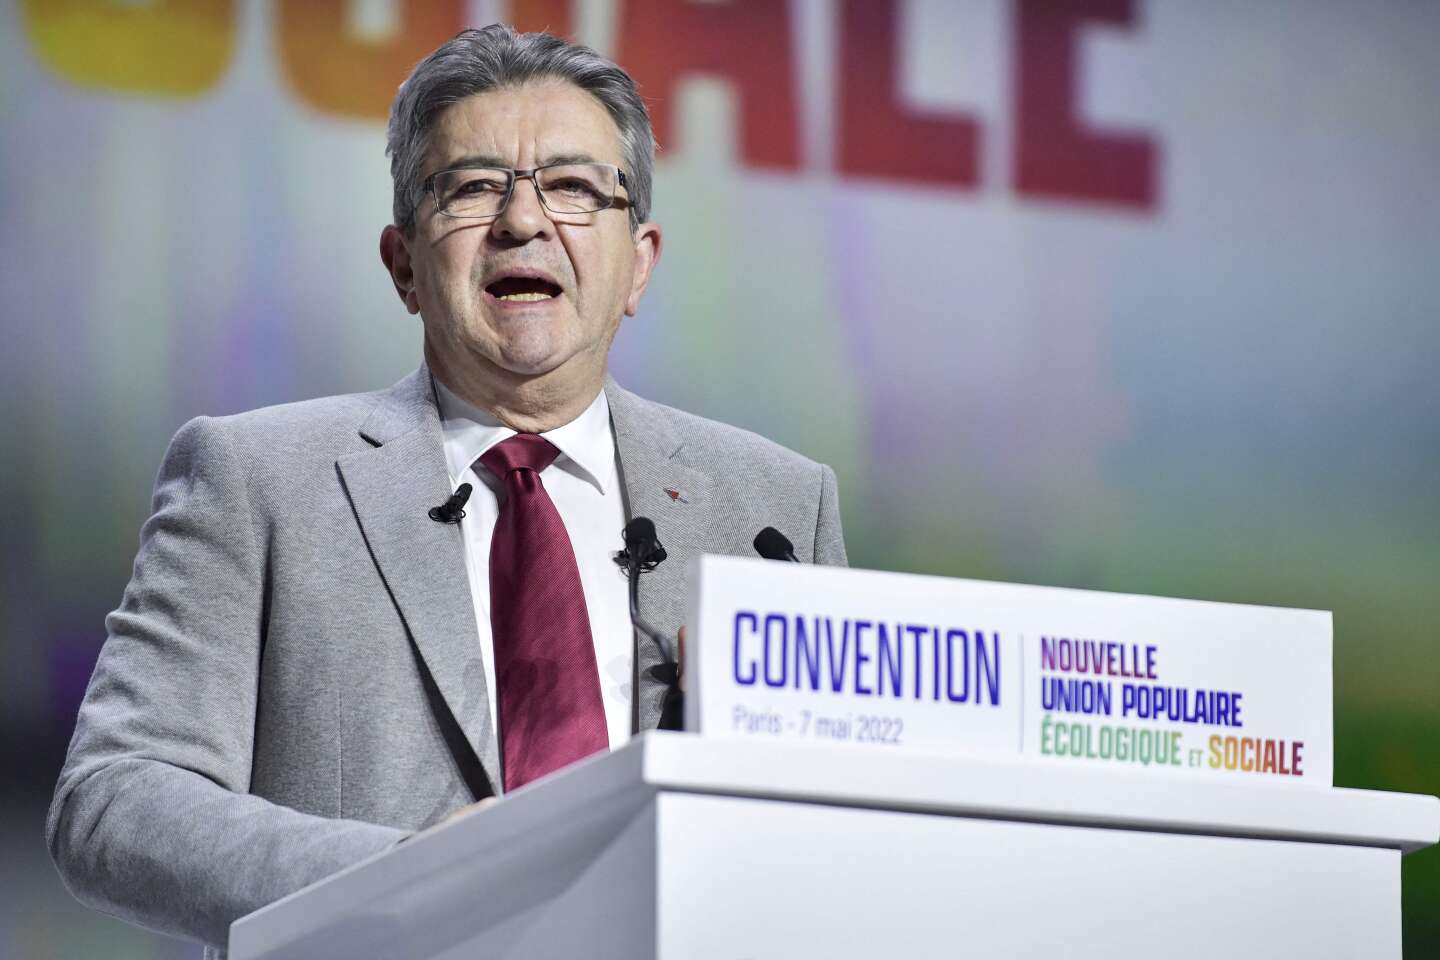 'After years of trial and error, Jean-Luc Mélenchon has found a role ...